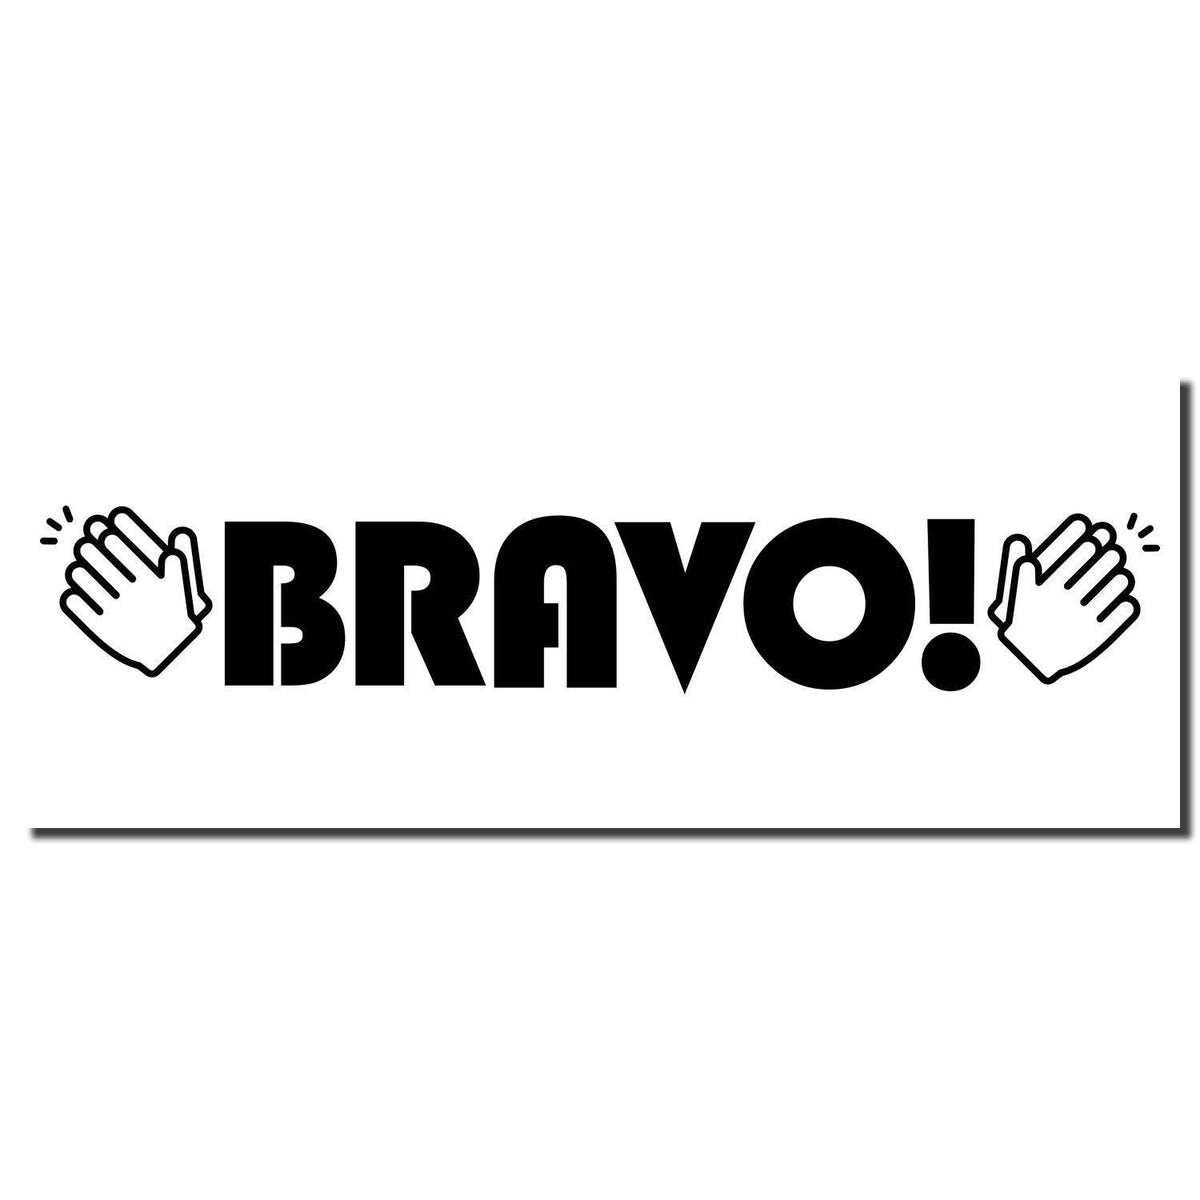 Enlarged Imprint Large Self-Inking Bravo with Hands Stamp Sample